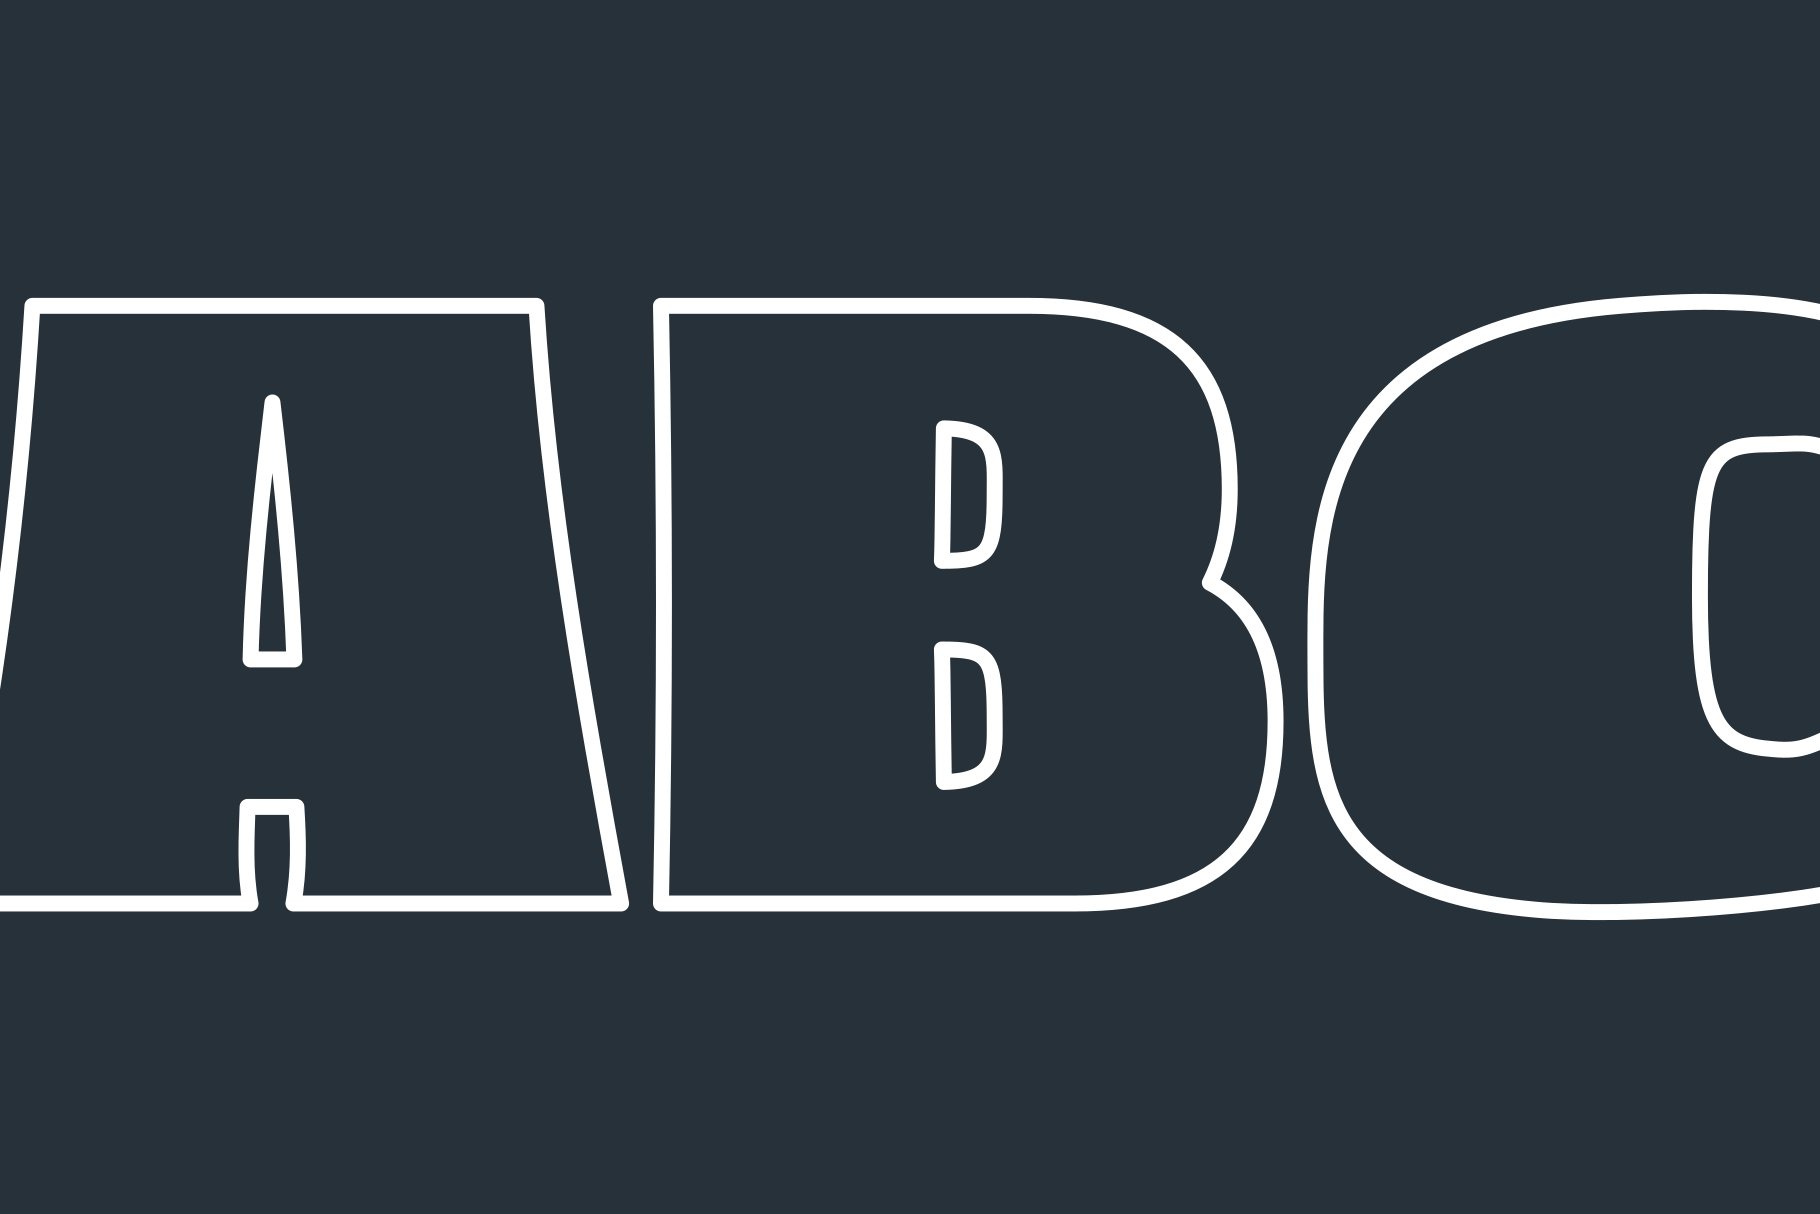 A black and white logo with the word abcc.